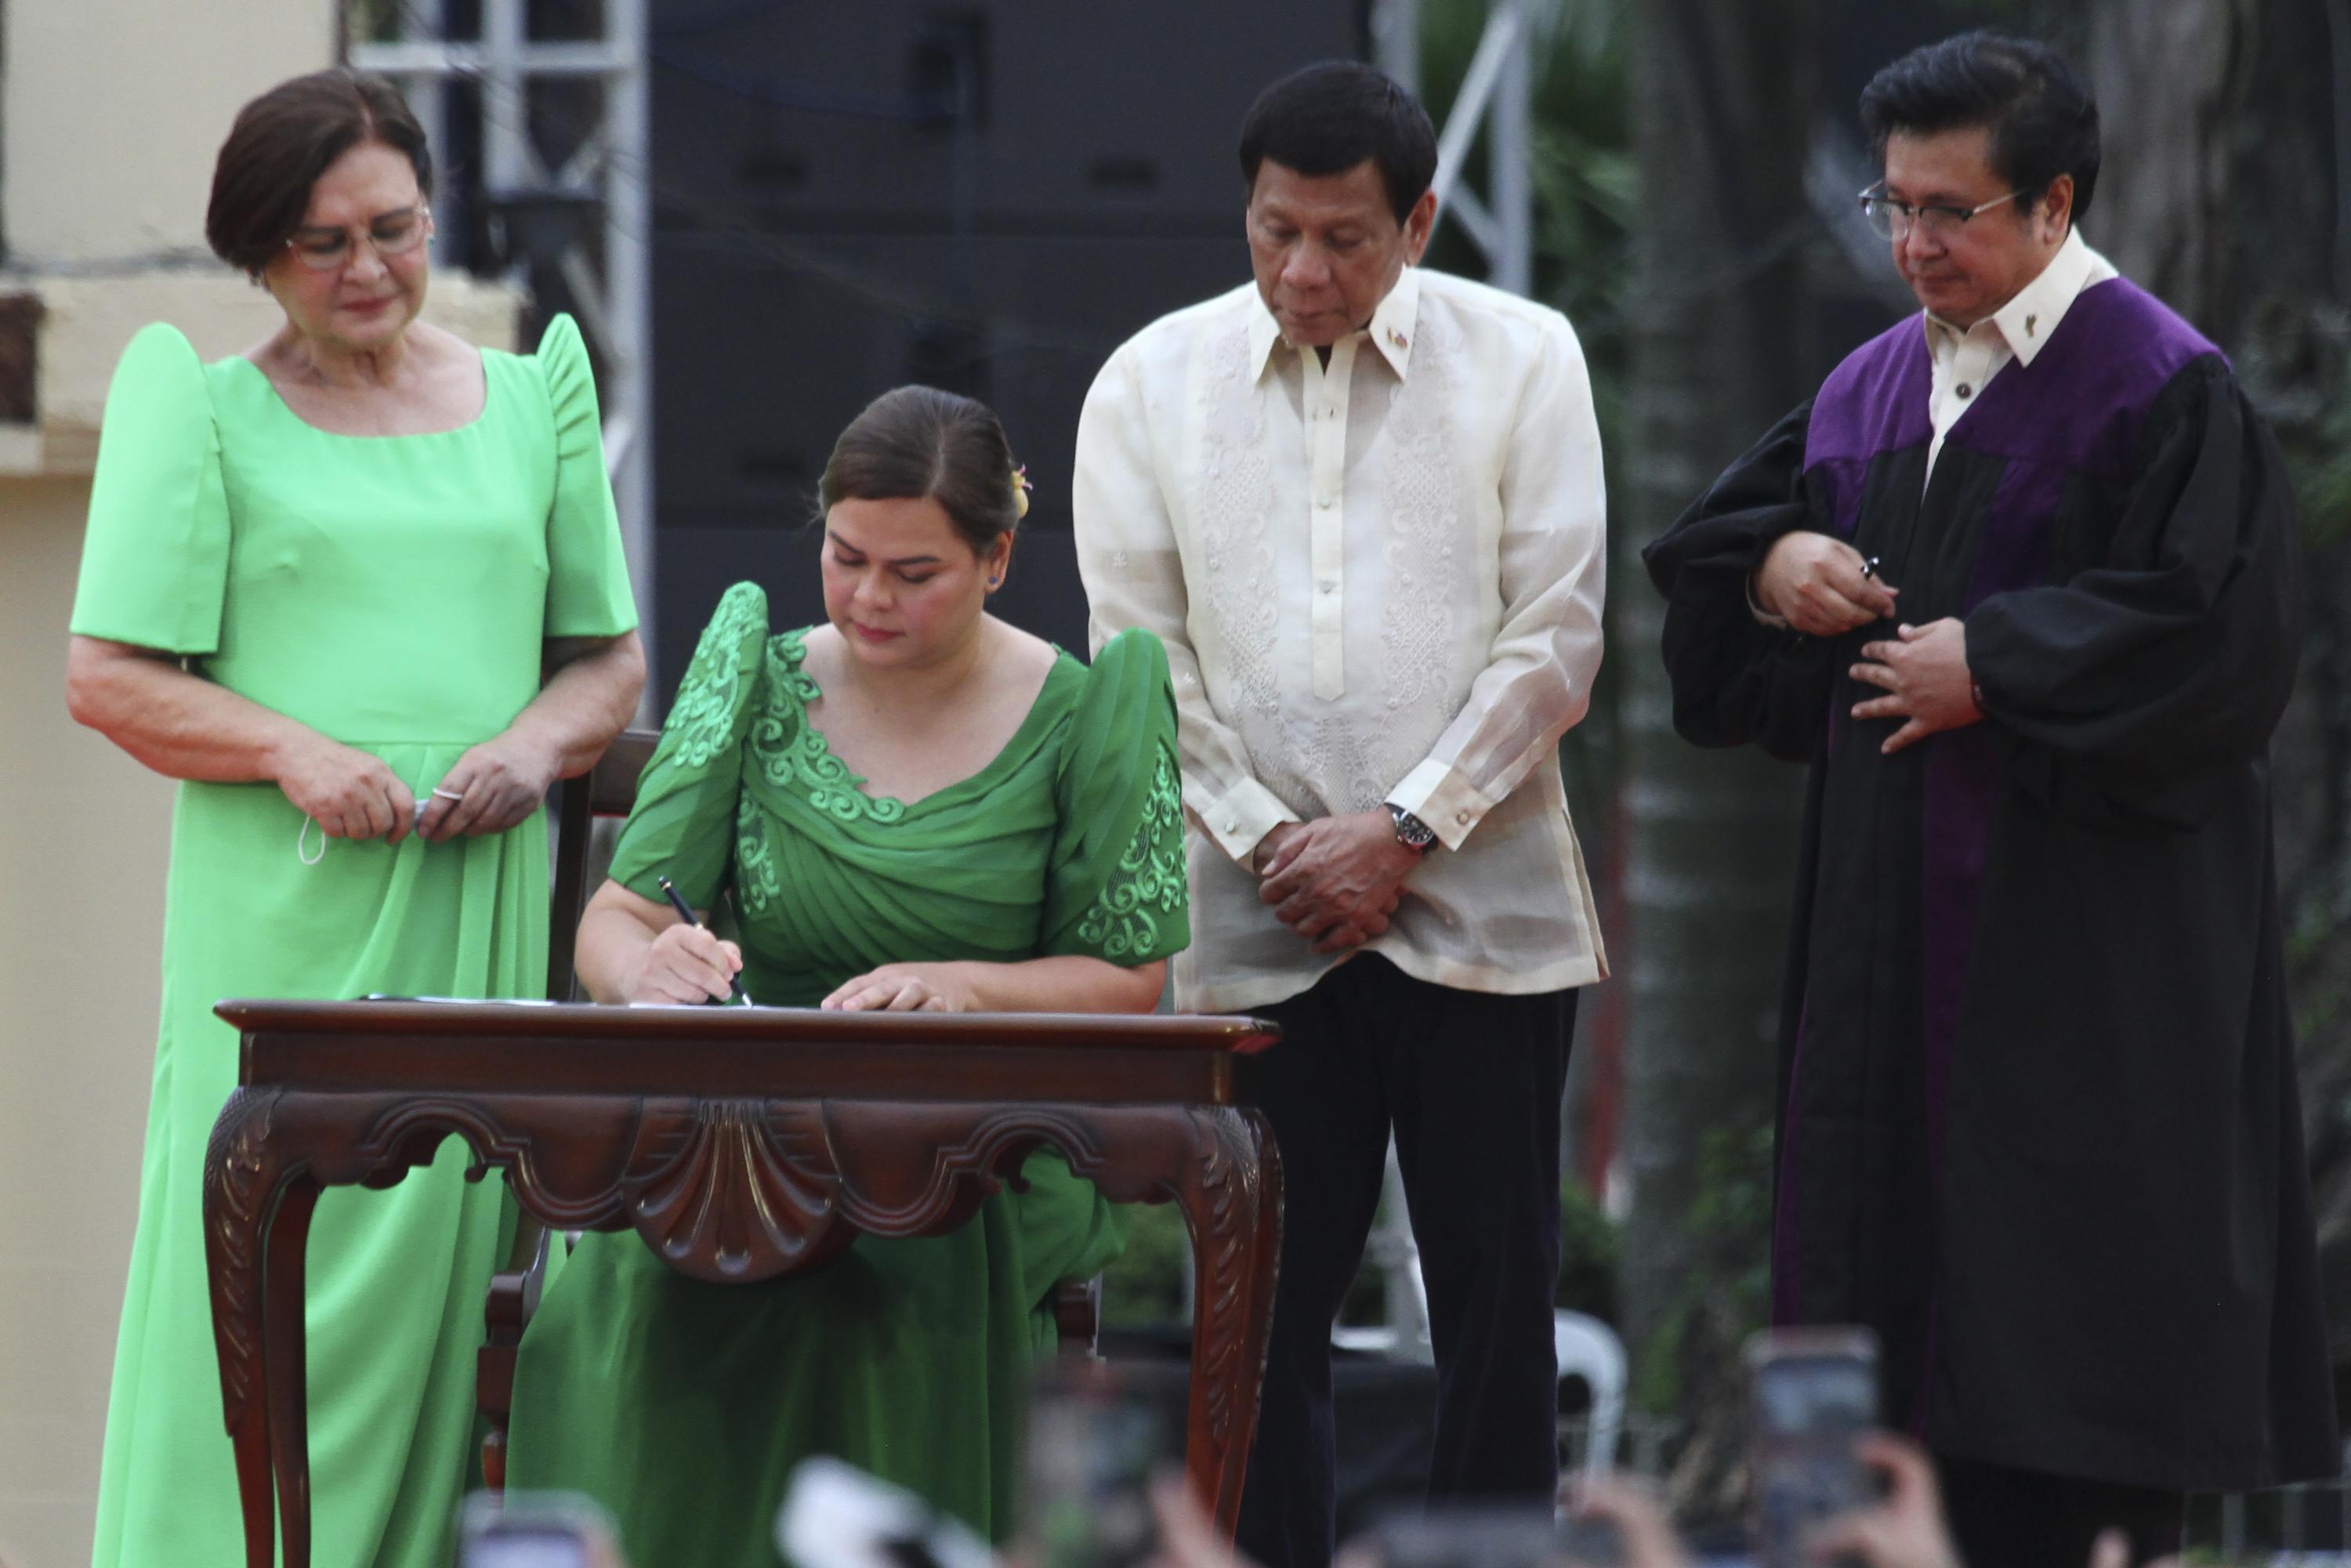 Duterte's daughter takes oath as Philippine vice president